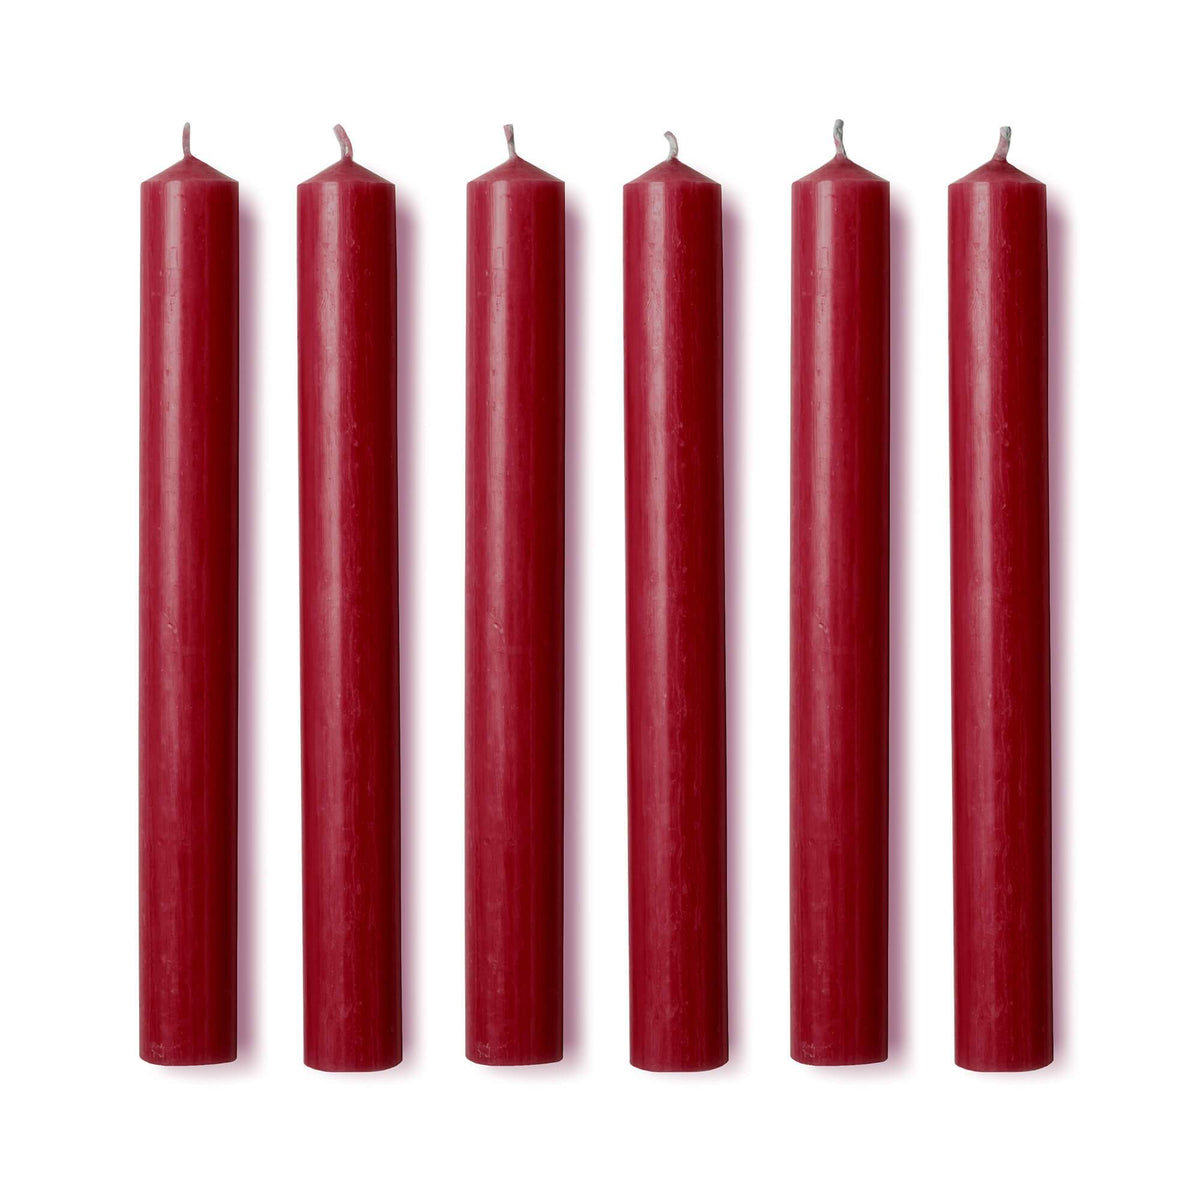 Dinner Candles in Aster Red